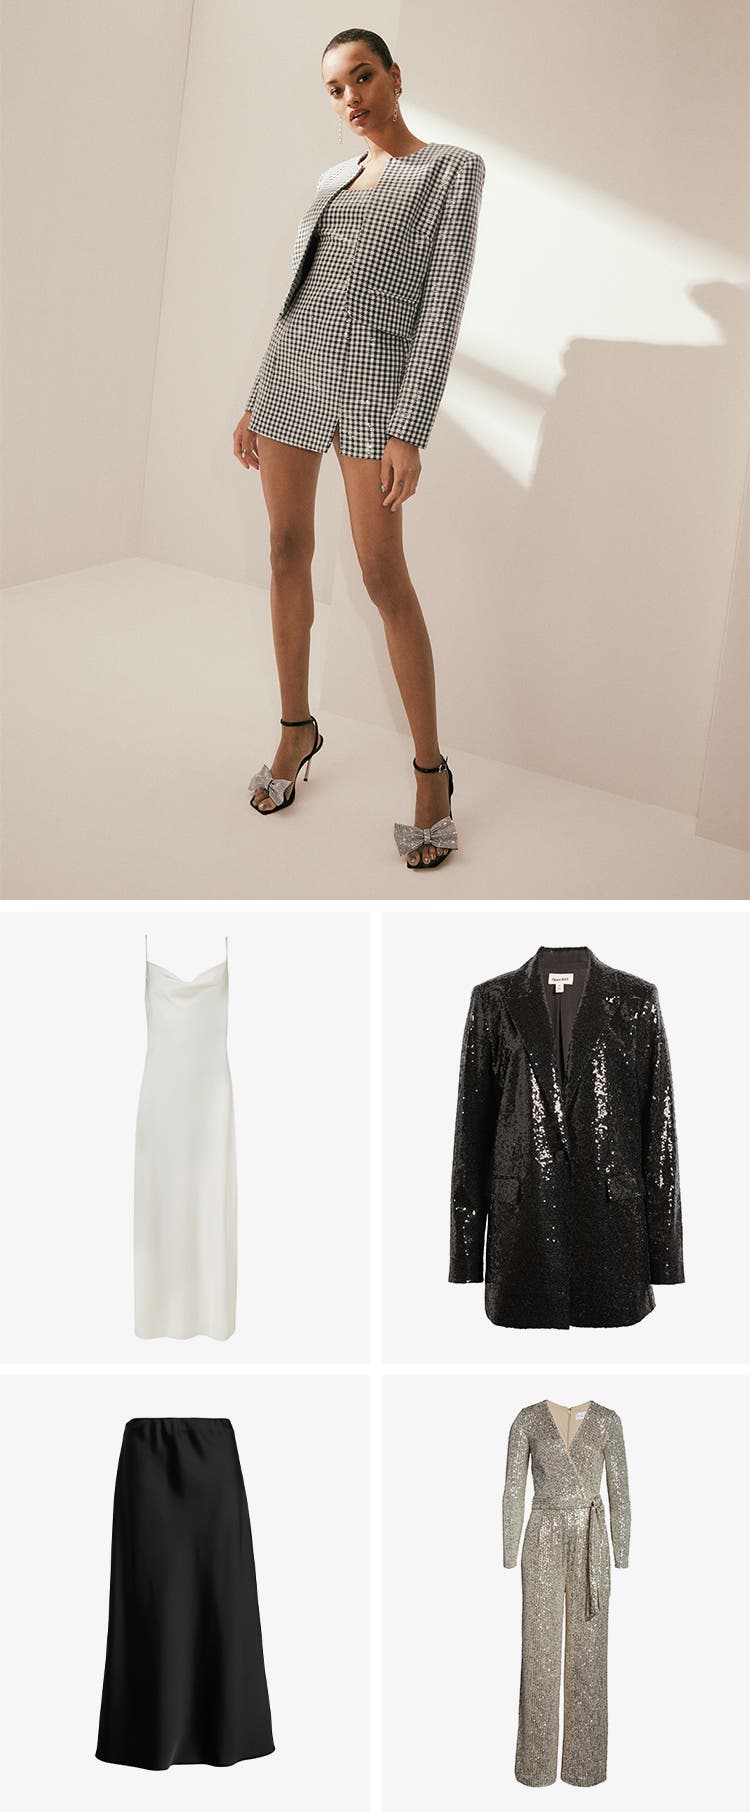 Top NYE Outfits - Have Need Want